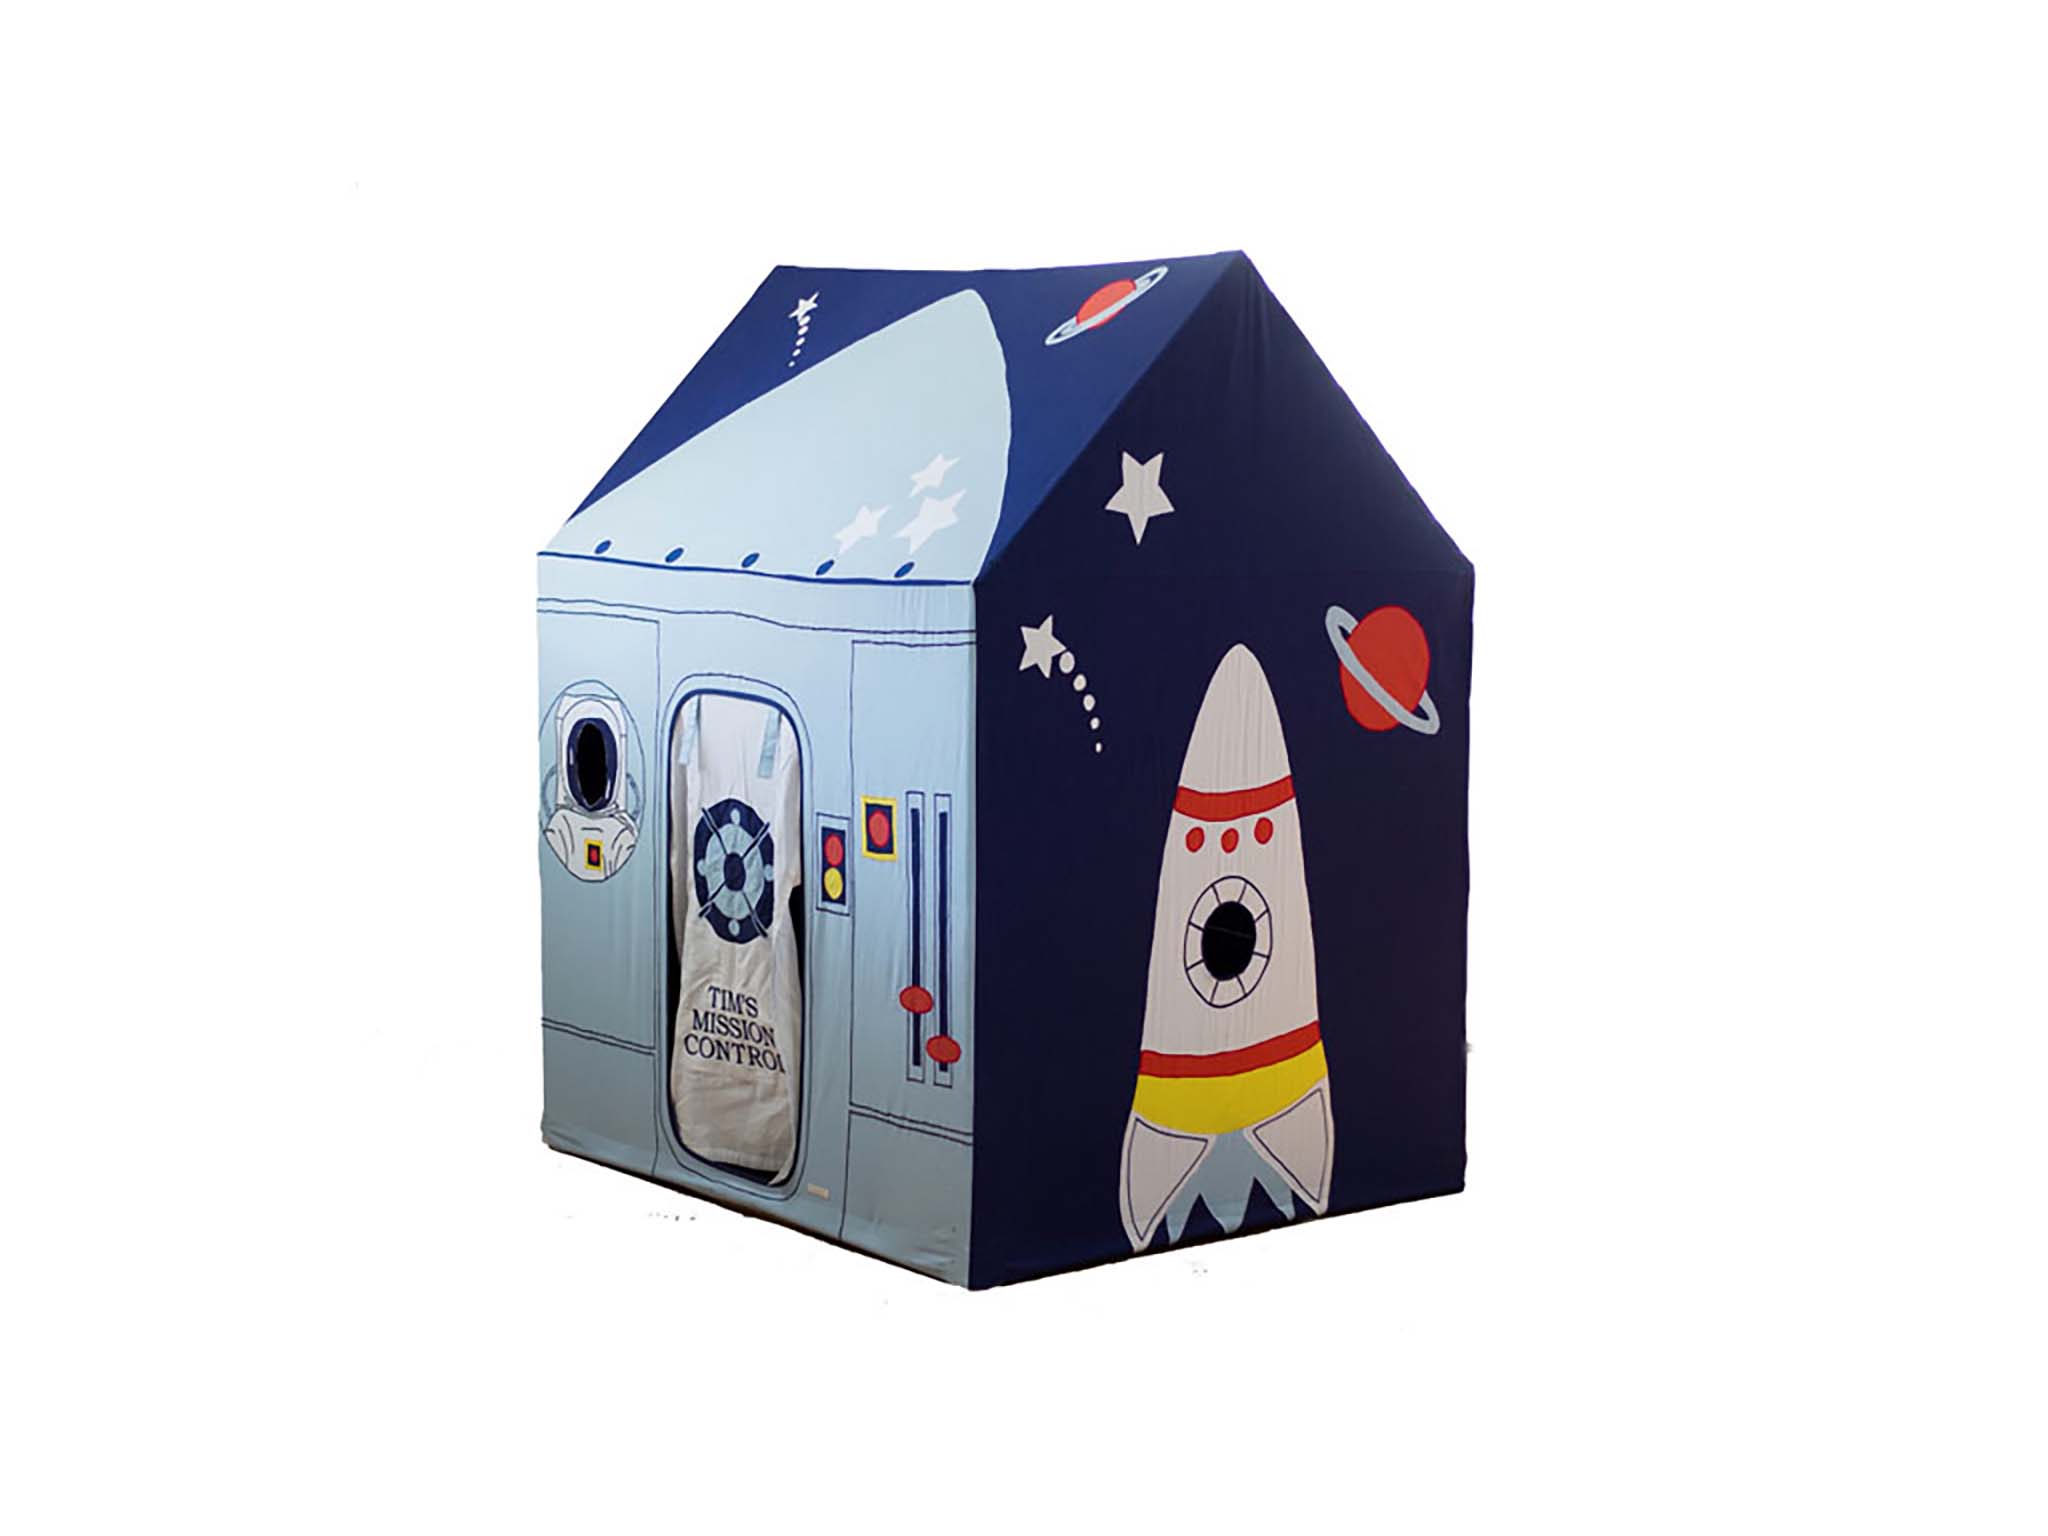 Outer space and rocket playhouse